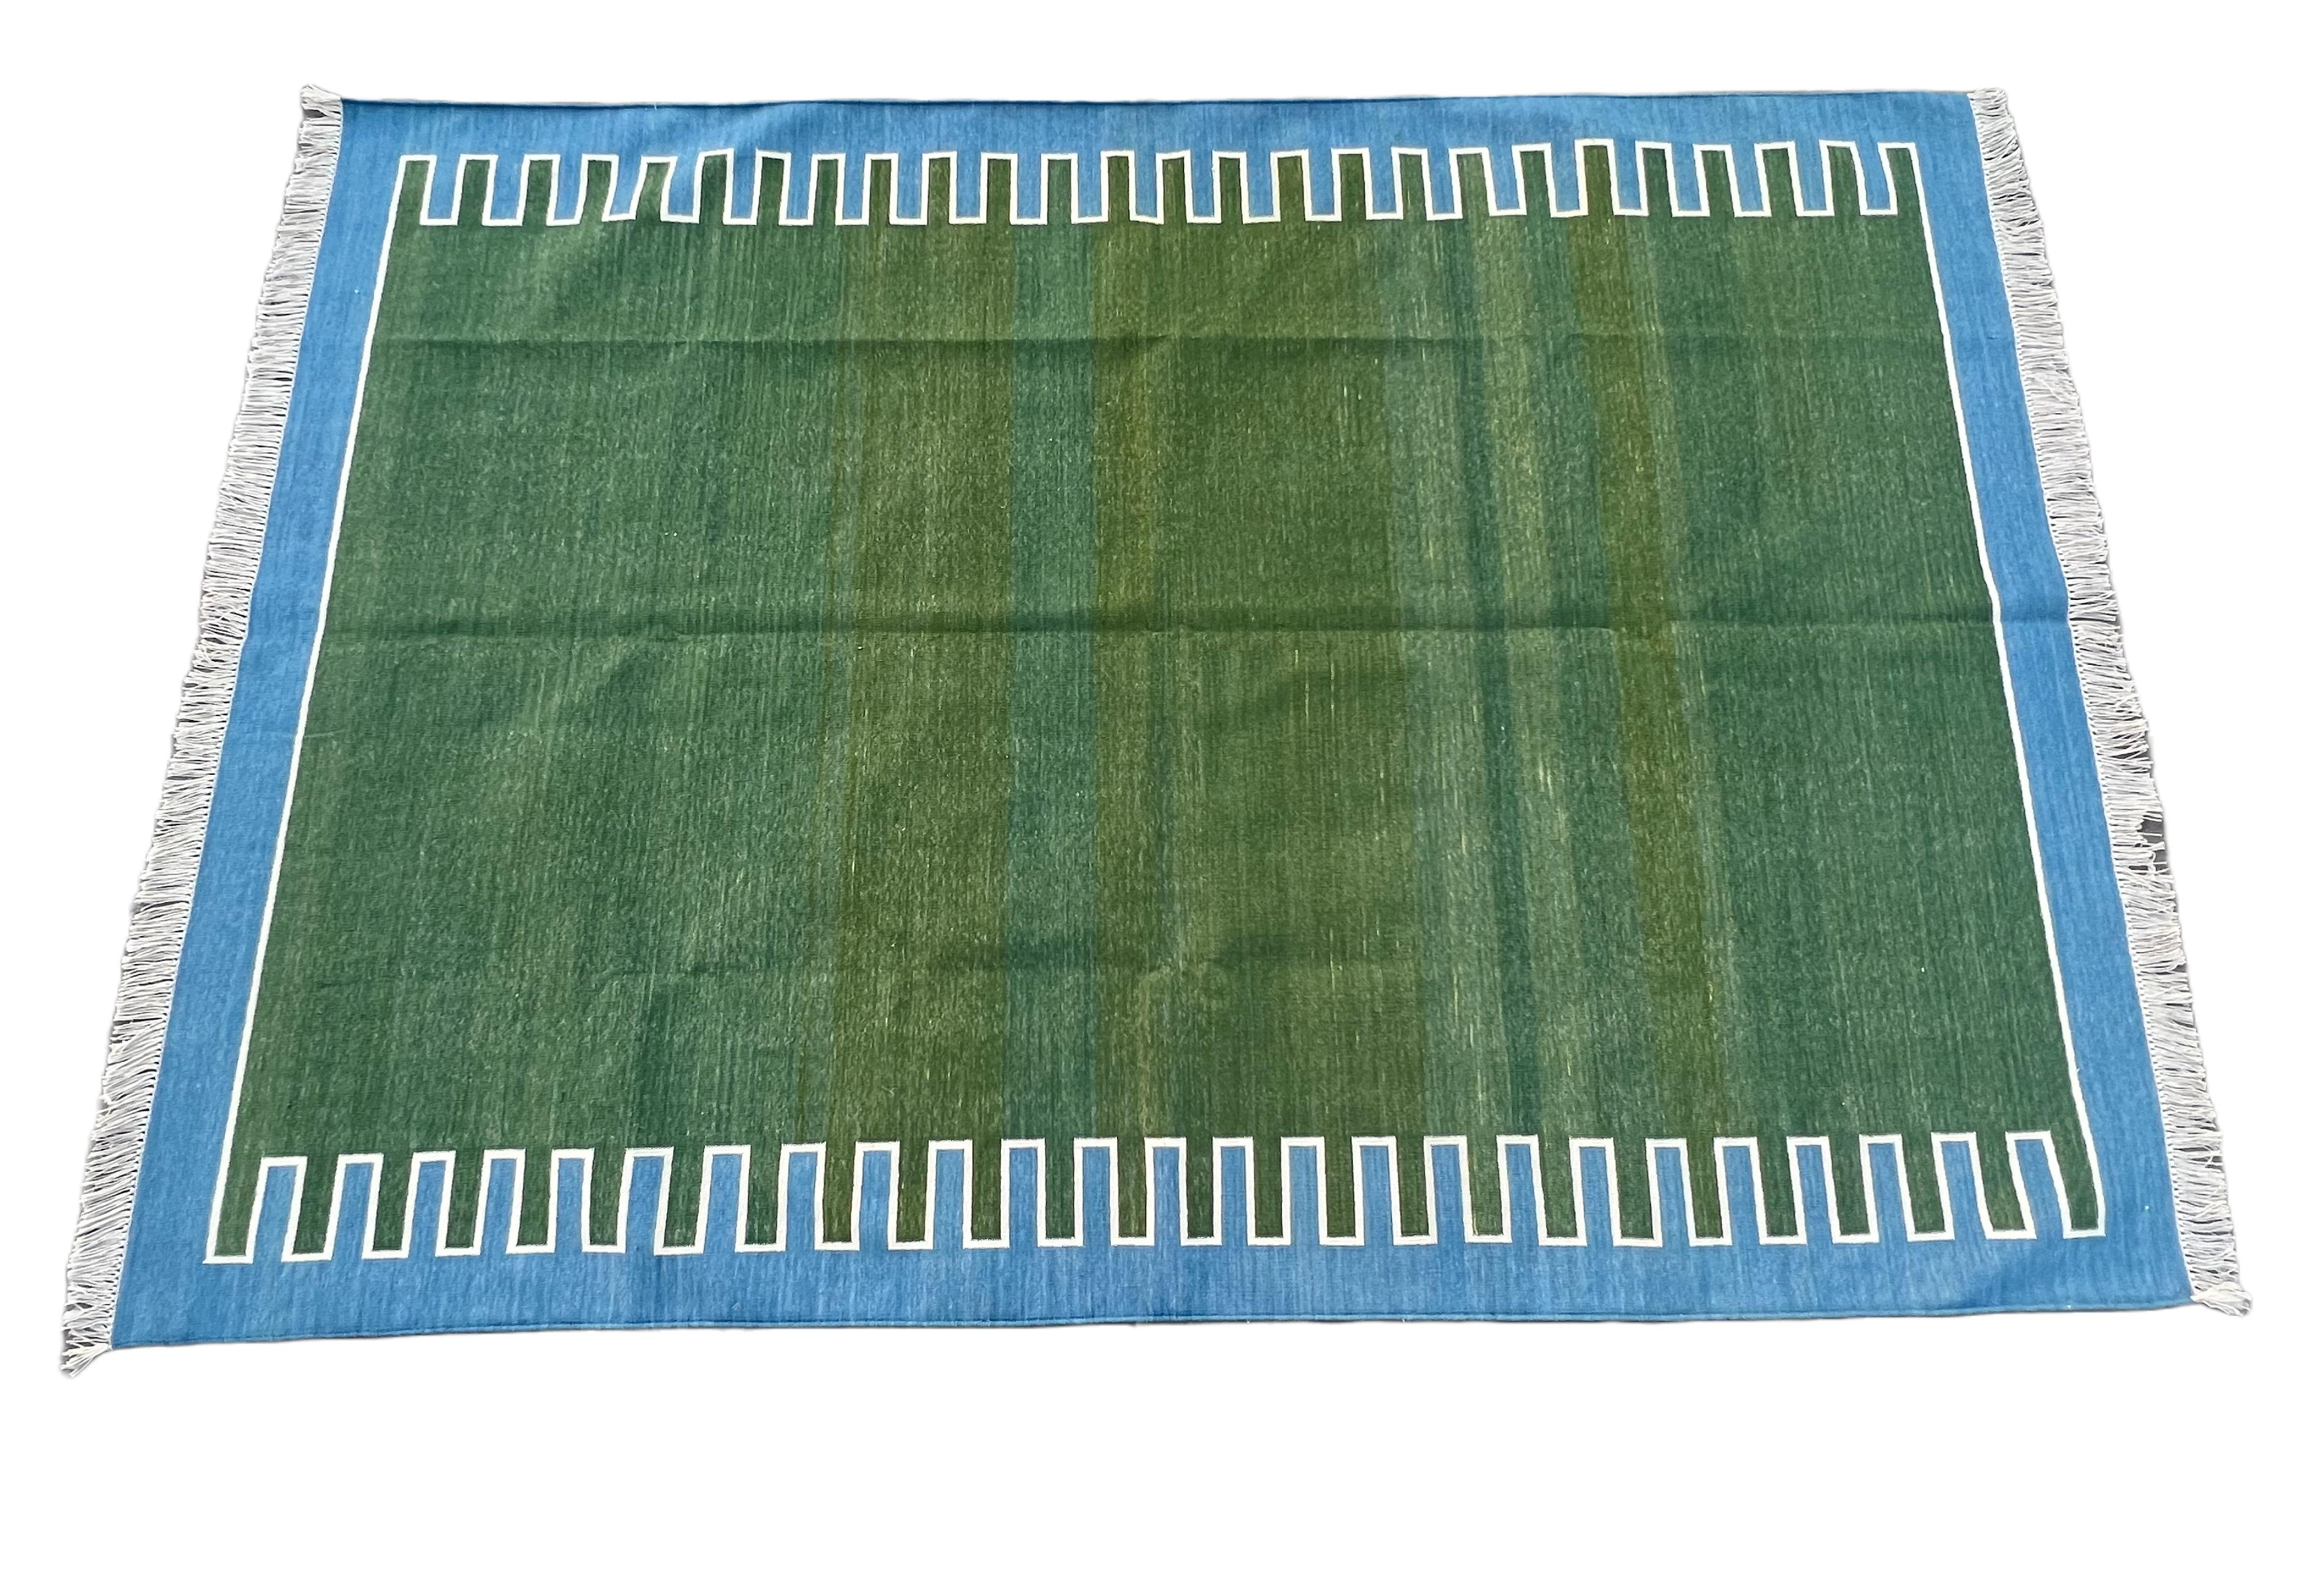 Handmade Cotton Area Flat Weave Rug, 5x7 Green And Blue Striped Indian Dhurrie For Sale 4